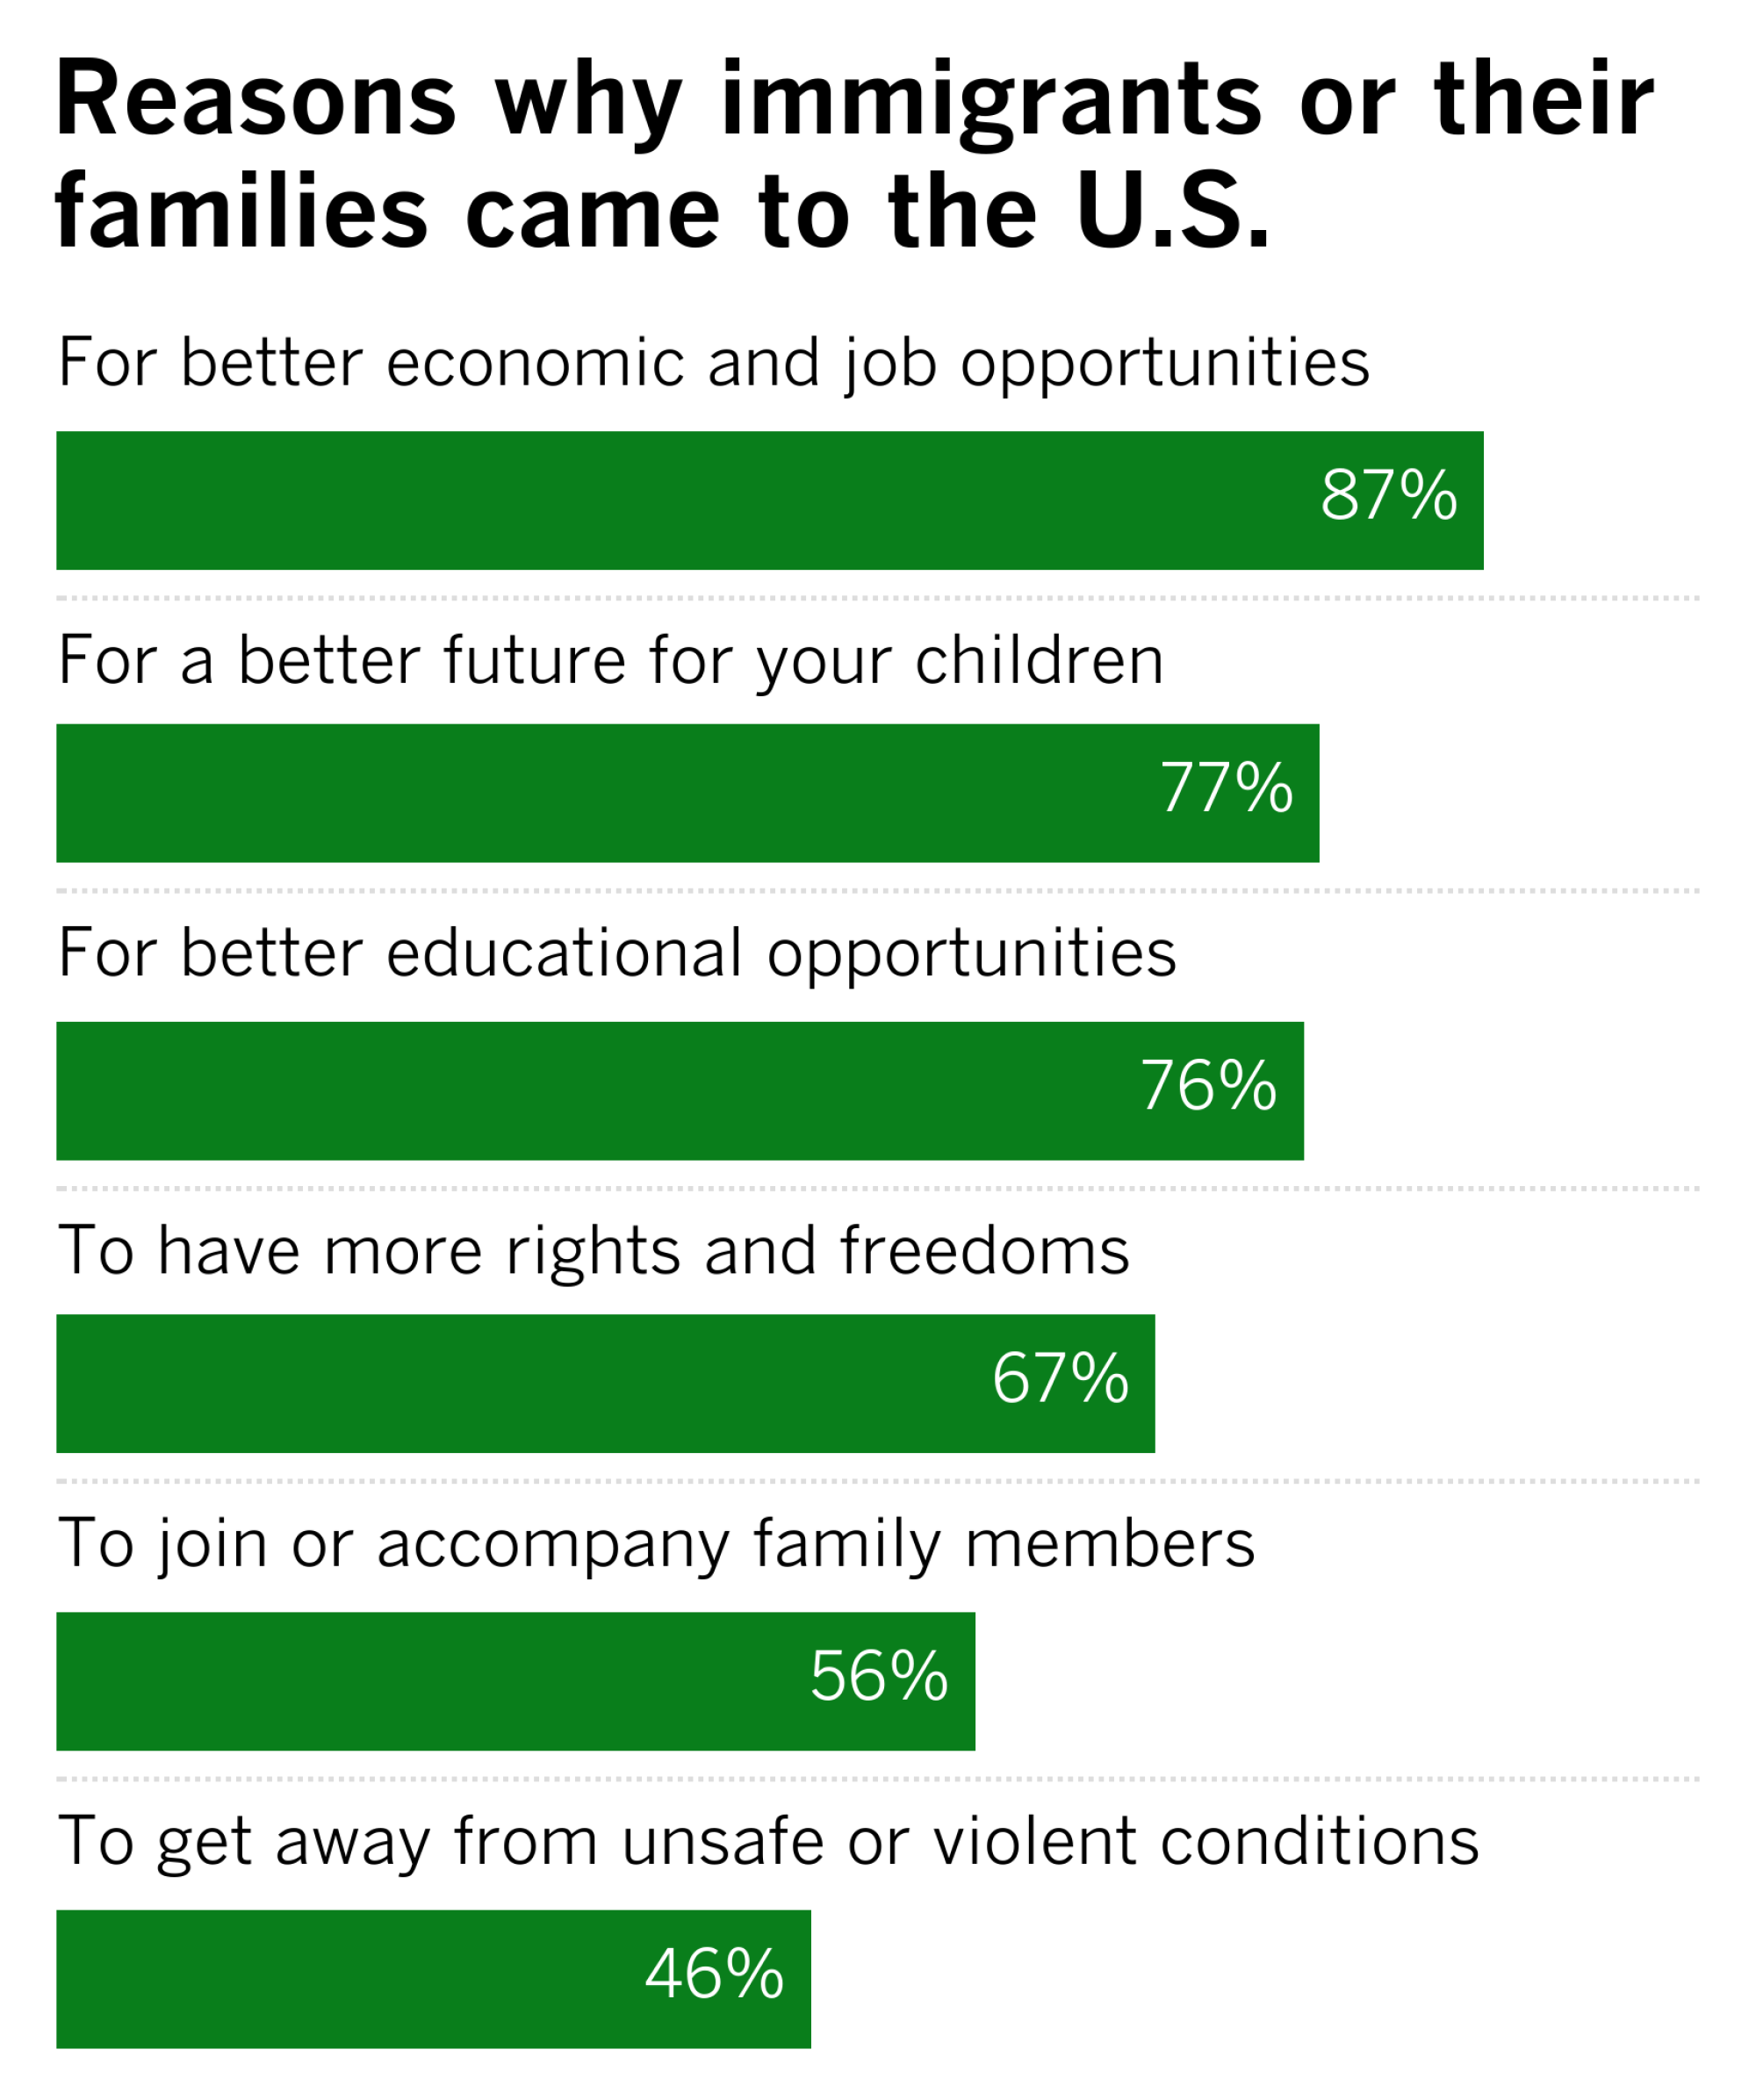 Immigrants came for economic/education opp., future for children, more freedoms, to join family & to get away from violence